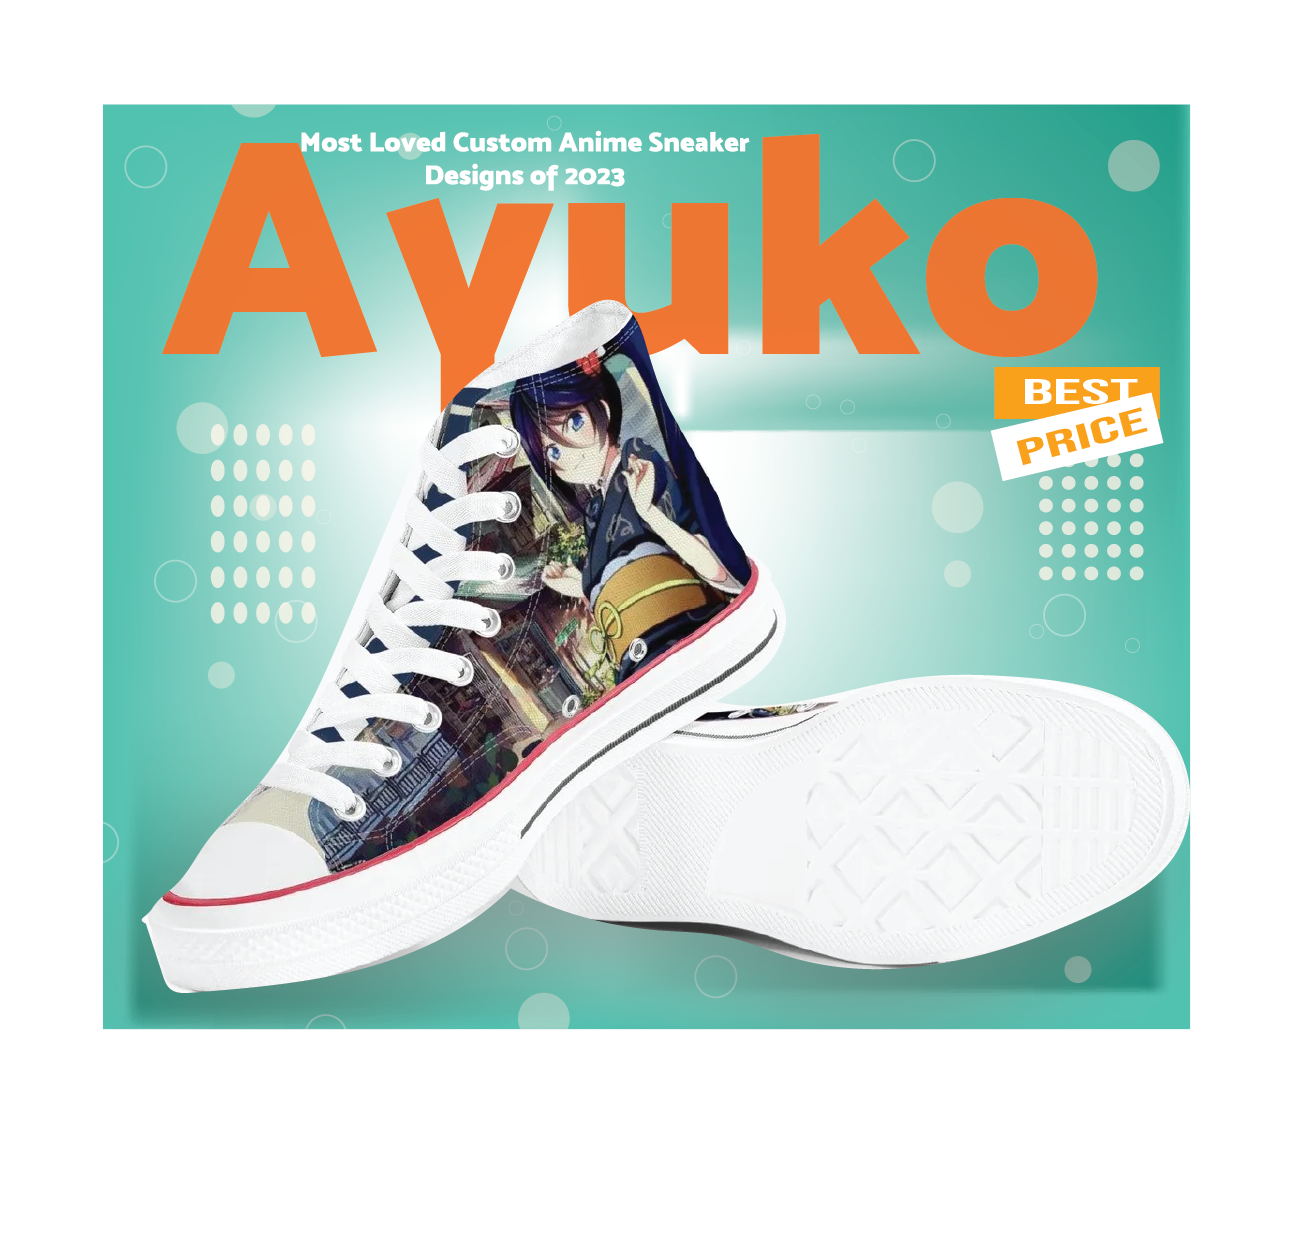 Anime Lovers Speak: Why AyukoShop is Their Top Choice